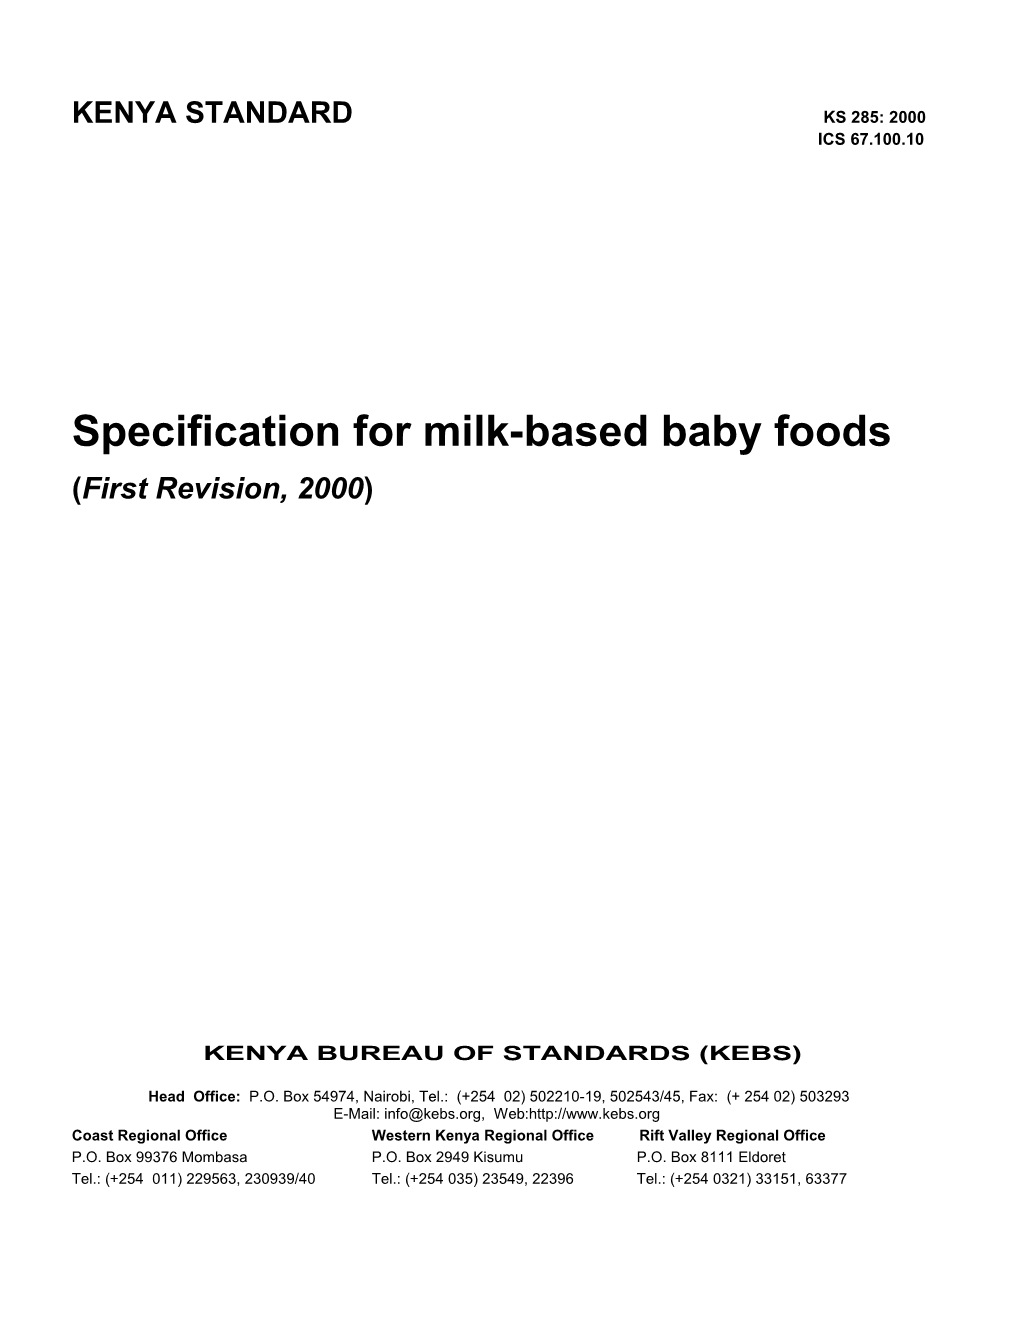 Specification for Milk-Based Baby Foods